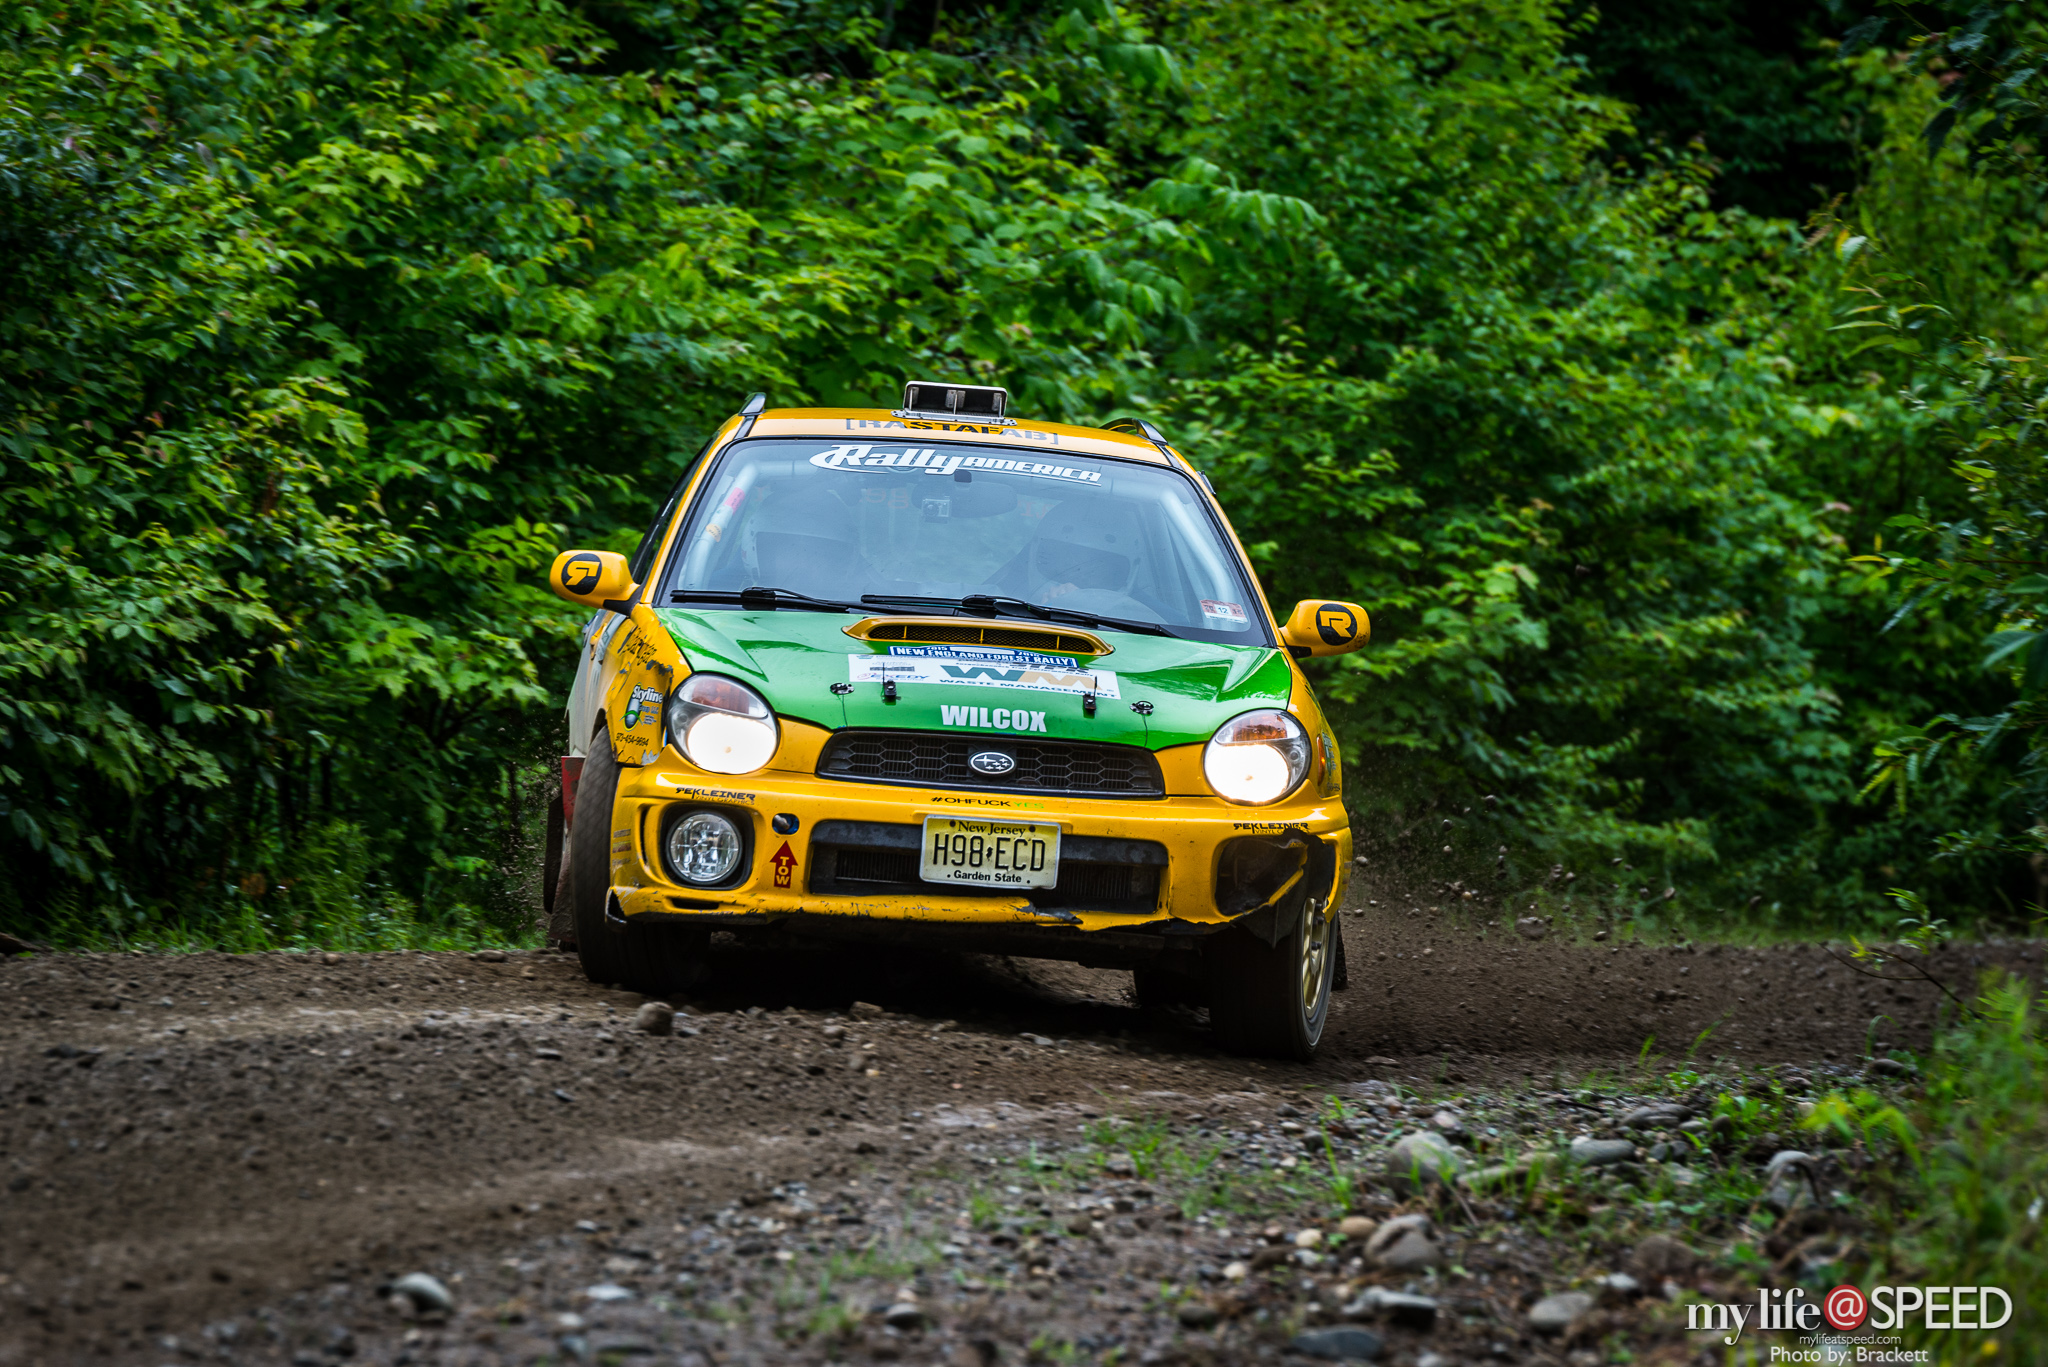 Fabio Costa getting it sideways on day two of NEFR after spending all night rebuilding a new engine.